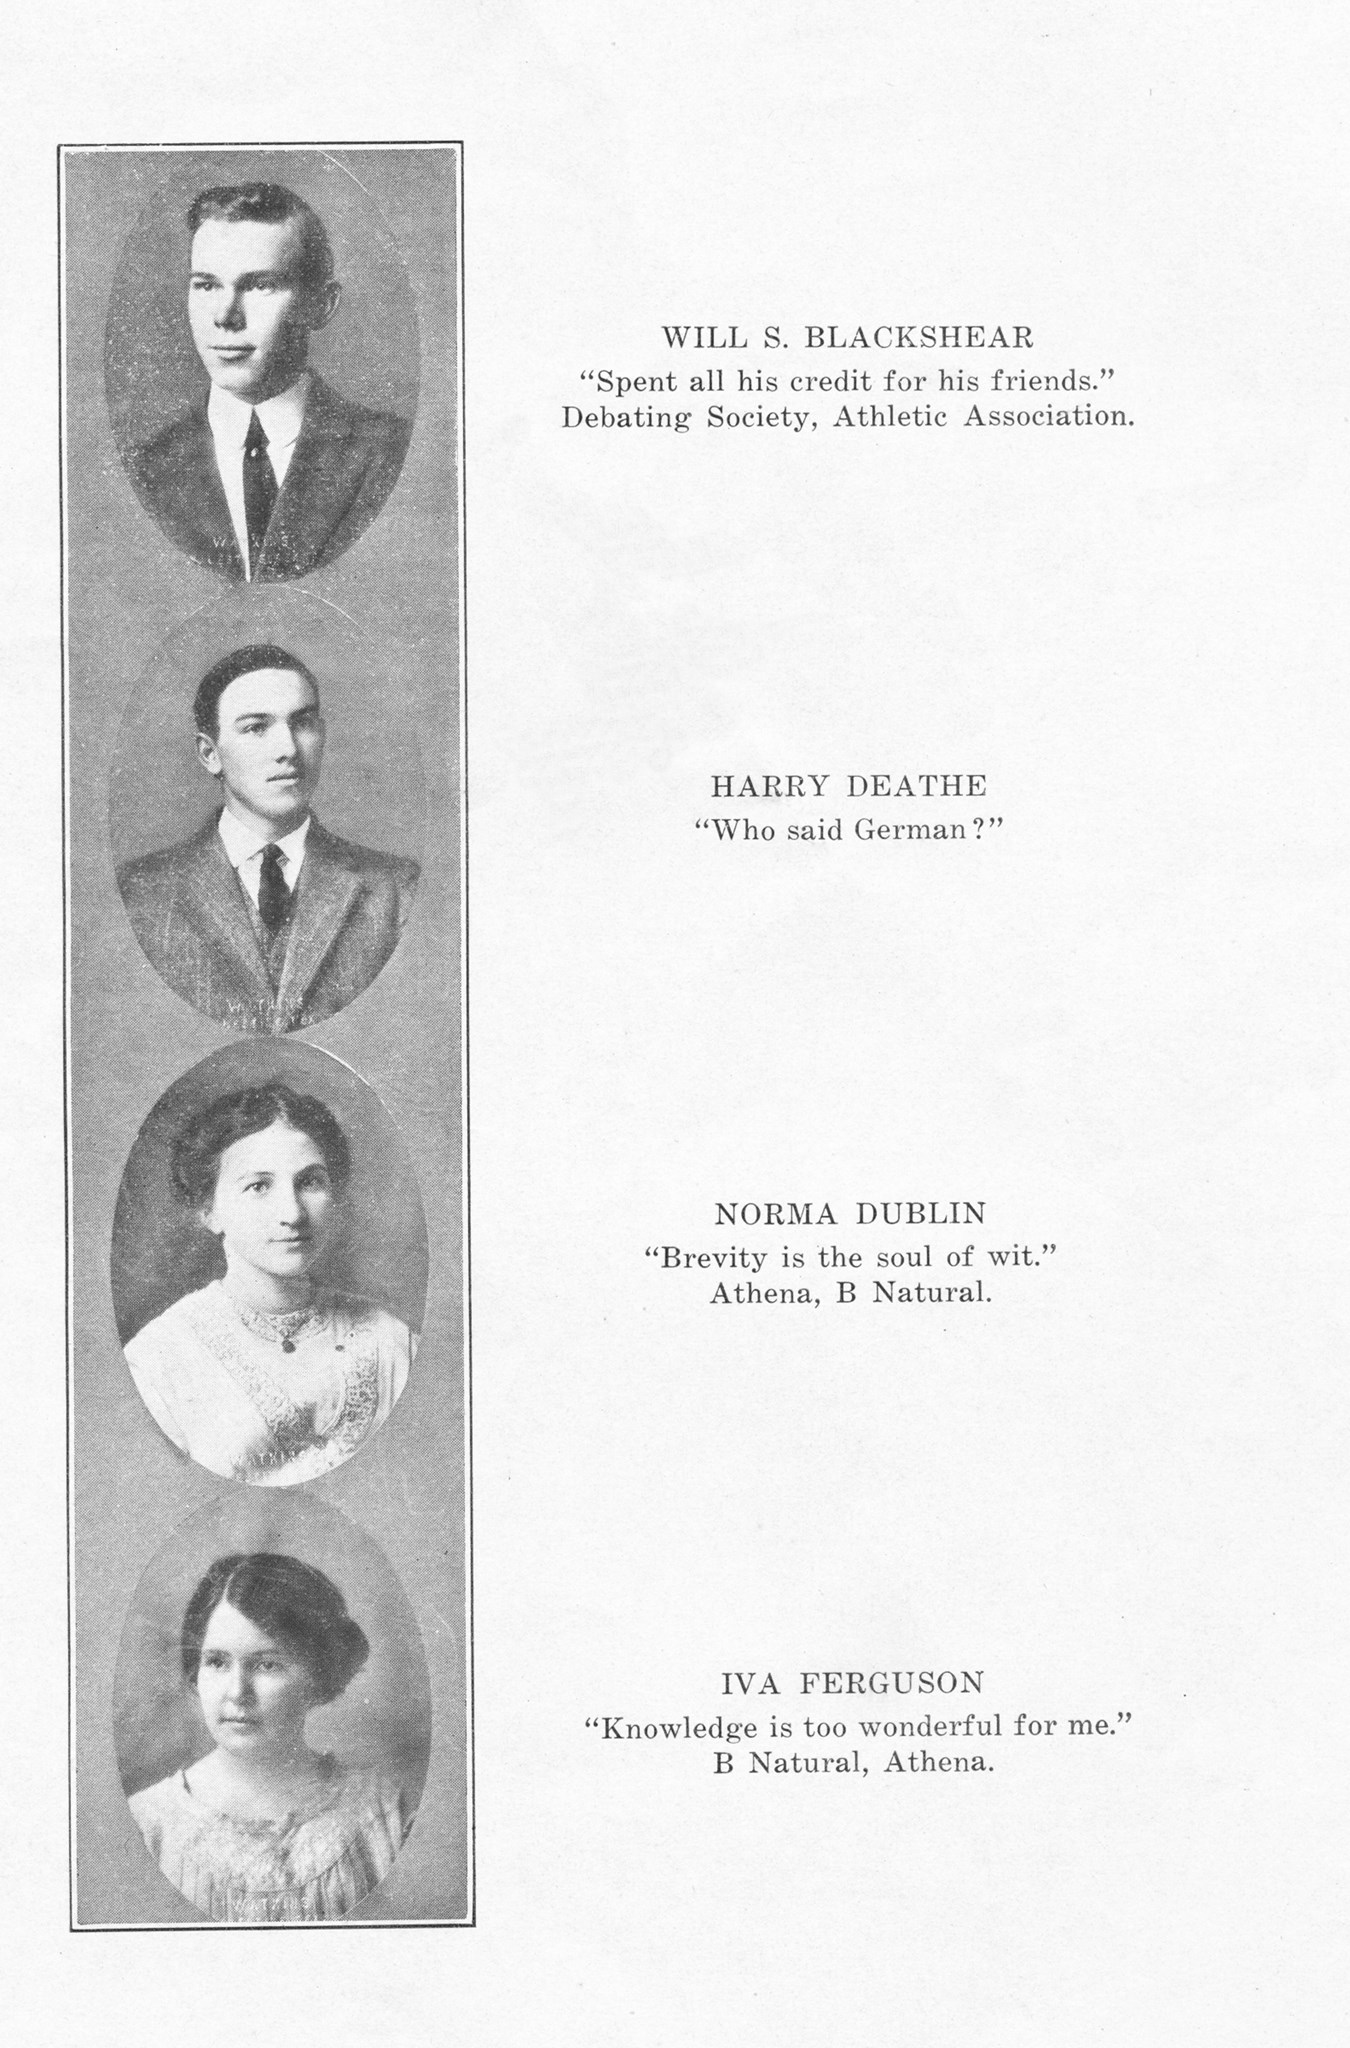 ../../../Images/Large/1912/Arclight-1912-pg0012.jpg